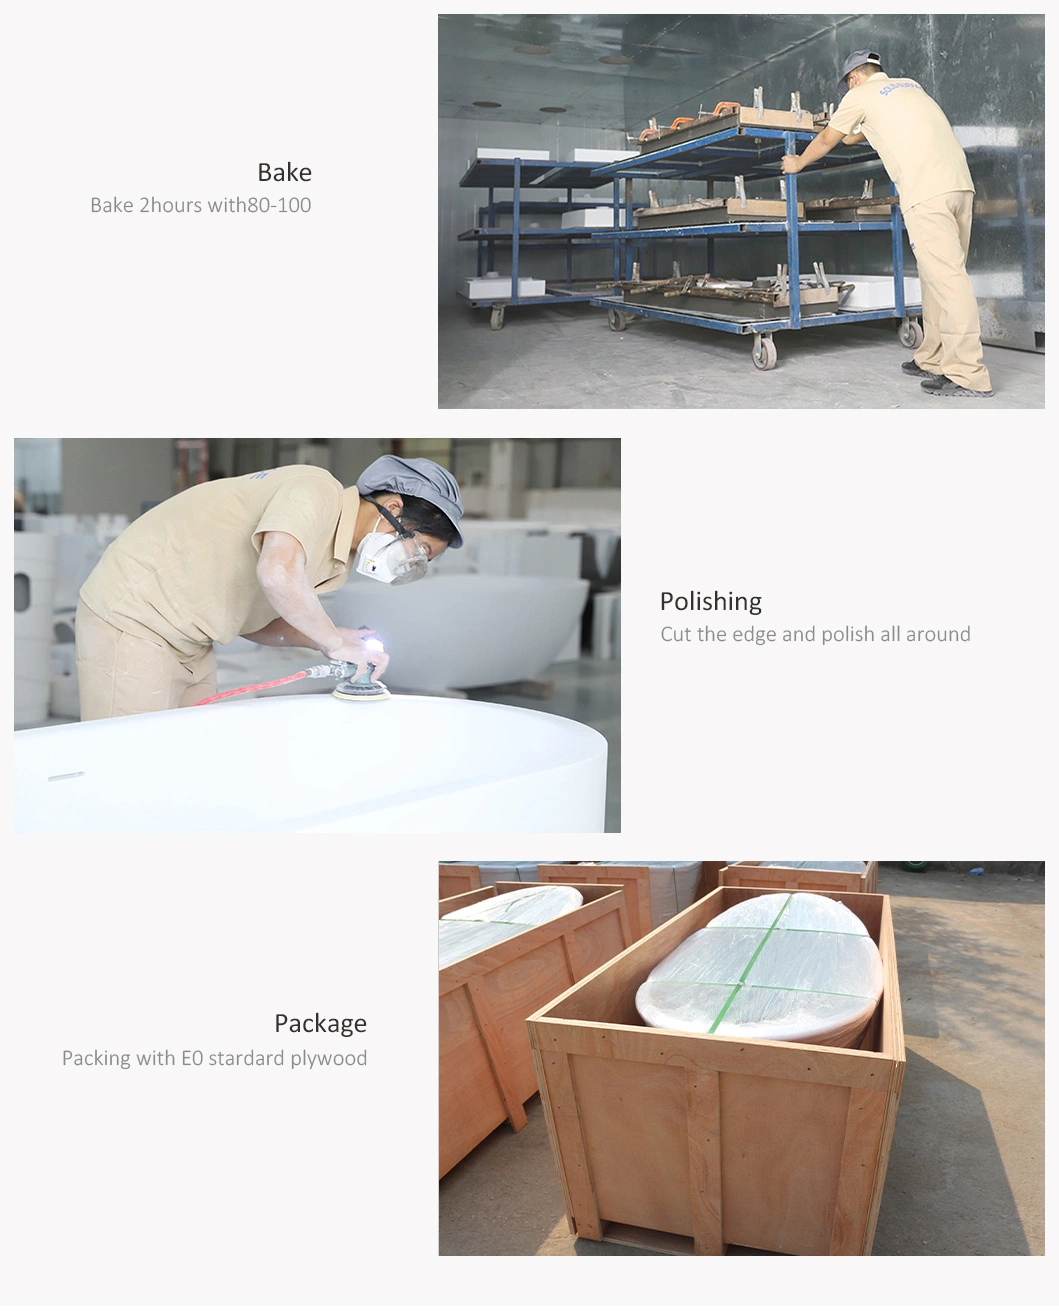 Wholesale Factory Price Upc SPA Adult Marble Stone Acrylic Solid Surface Freestanding Bathtub for Hotel